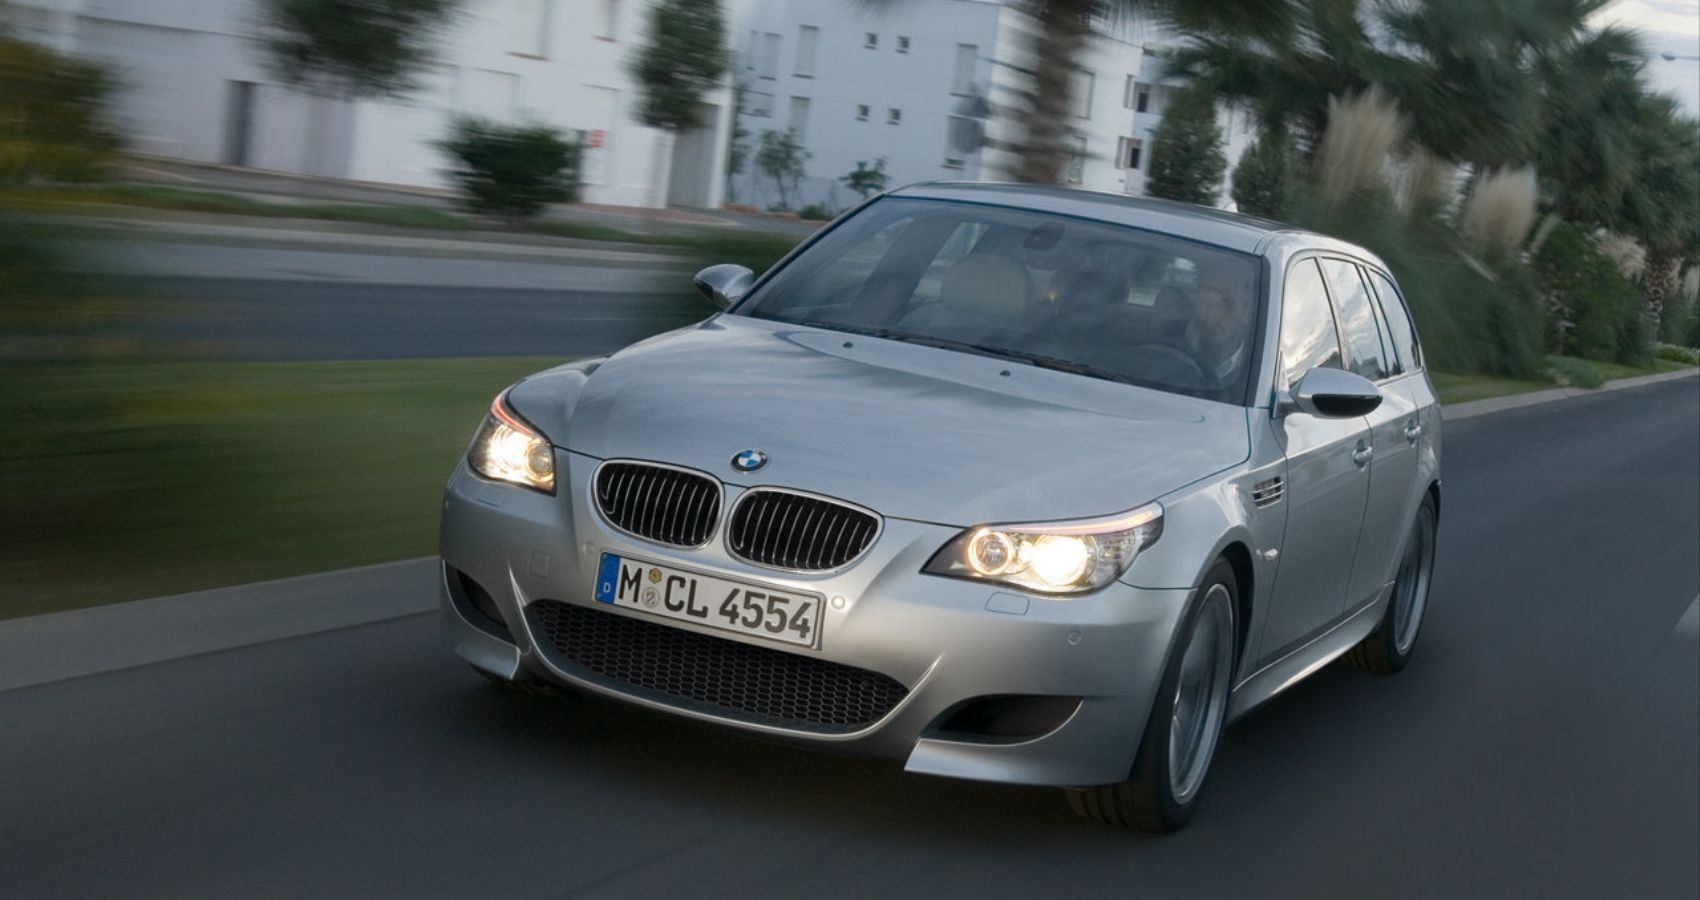 BMW M5 (2005-2010) Review